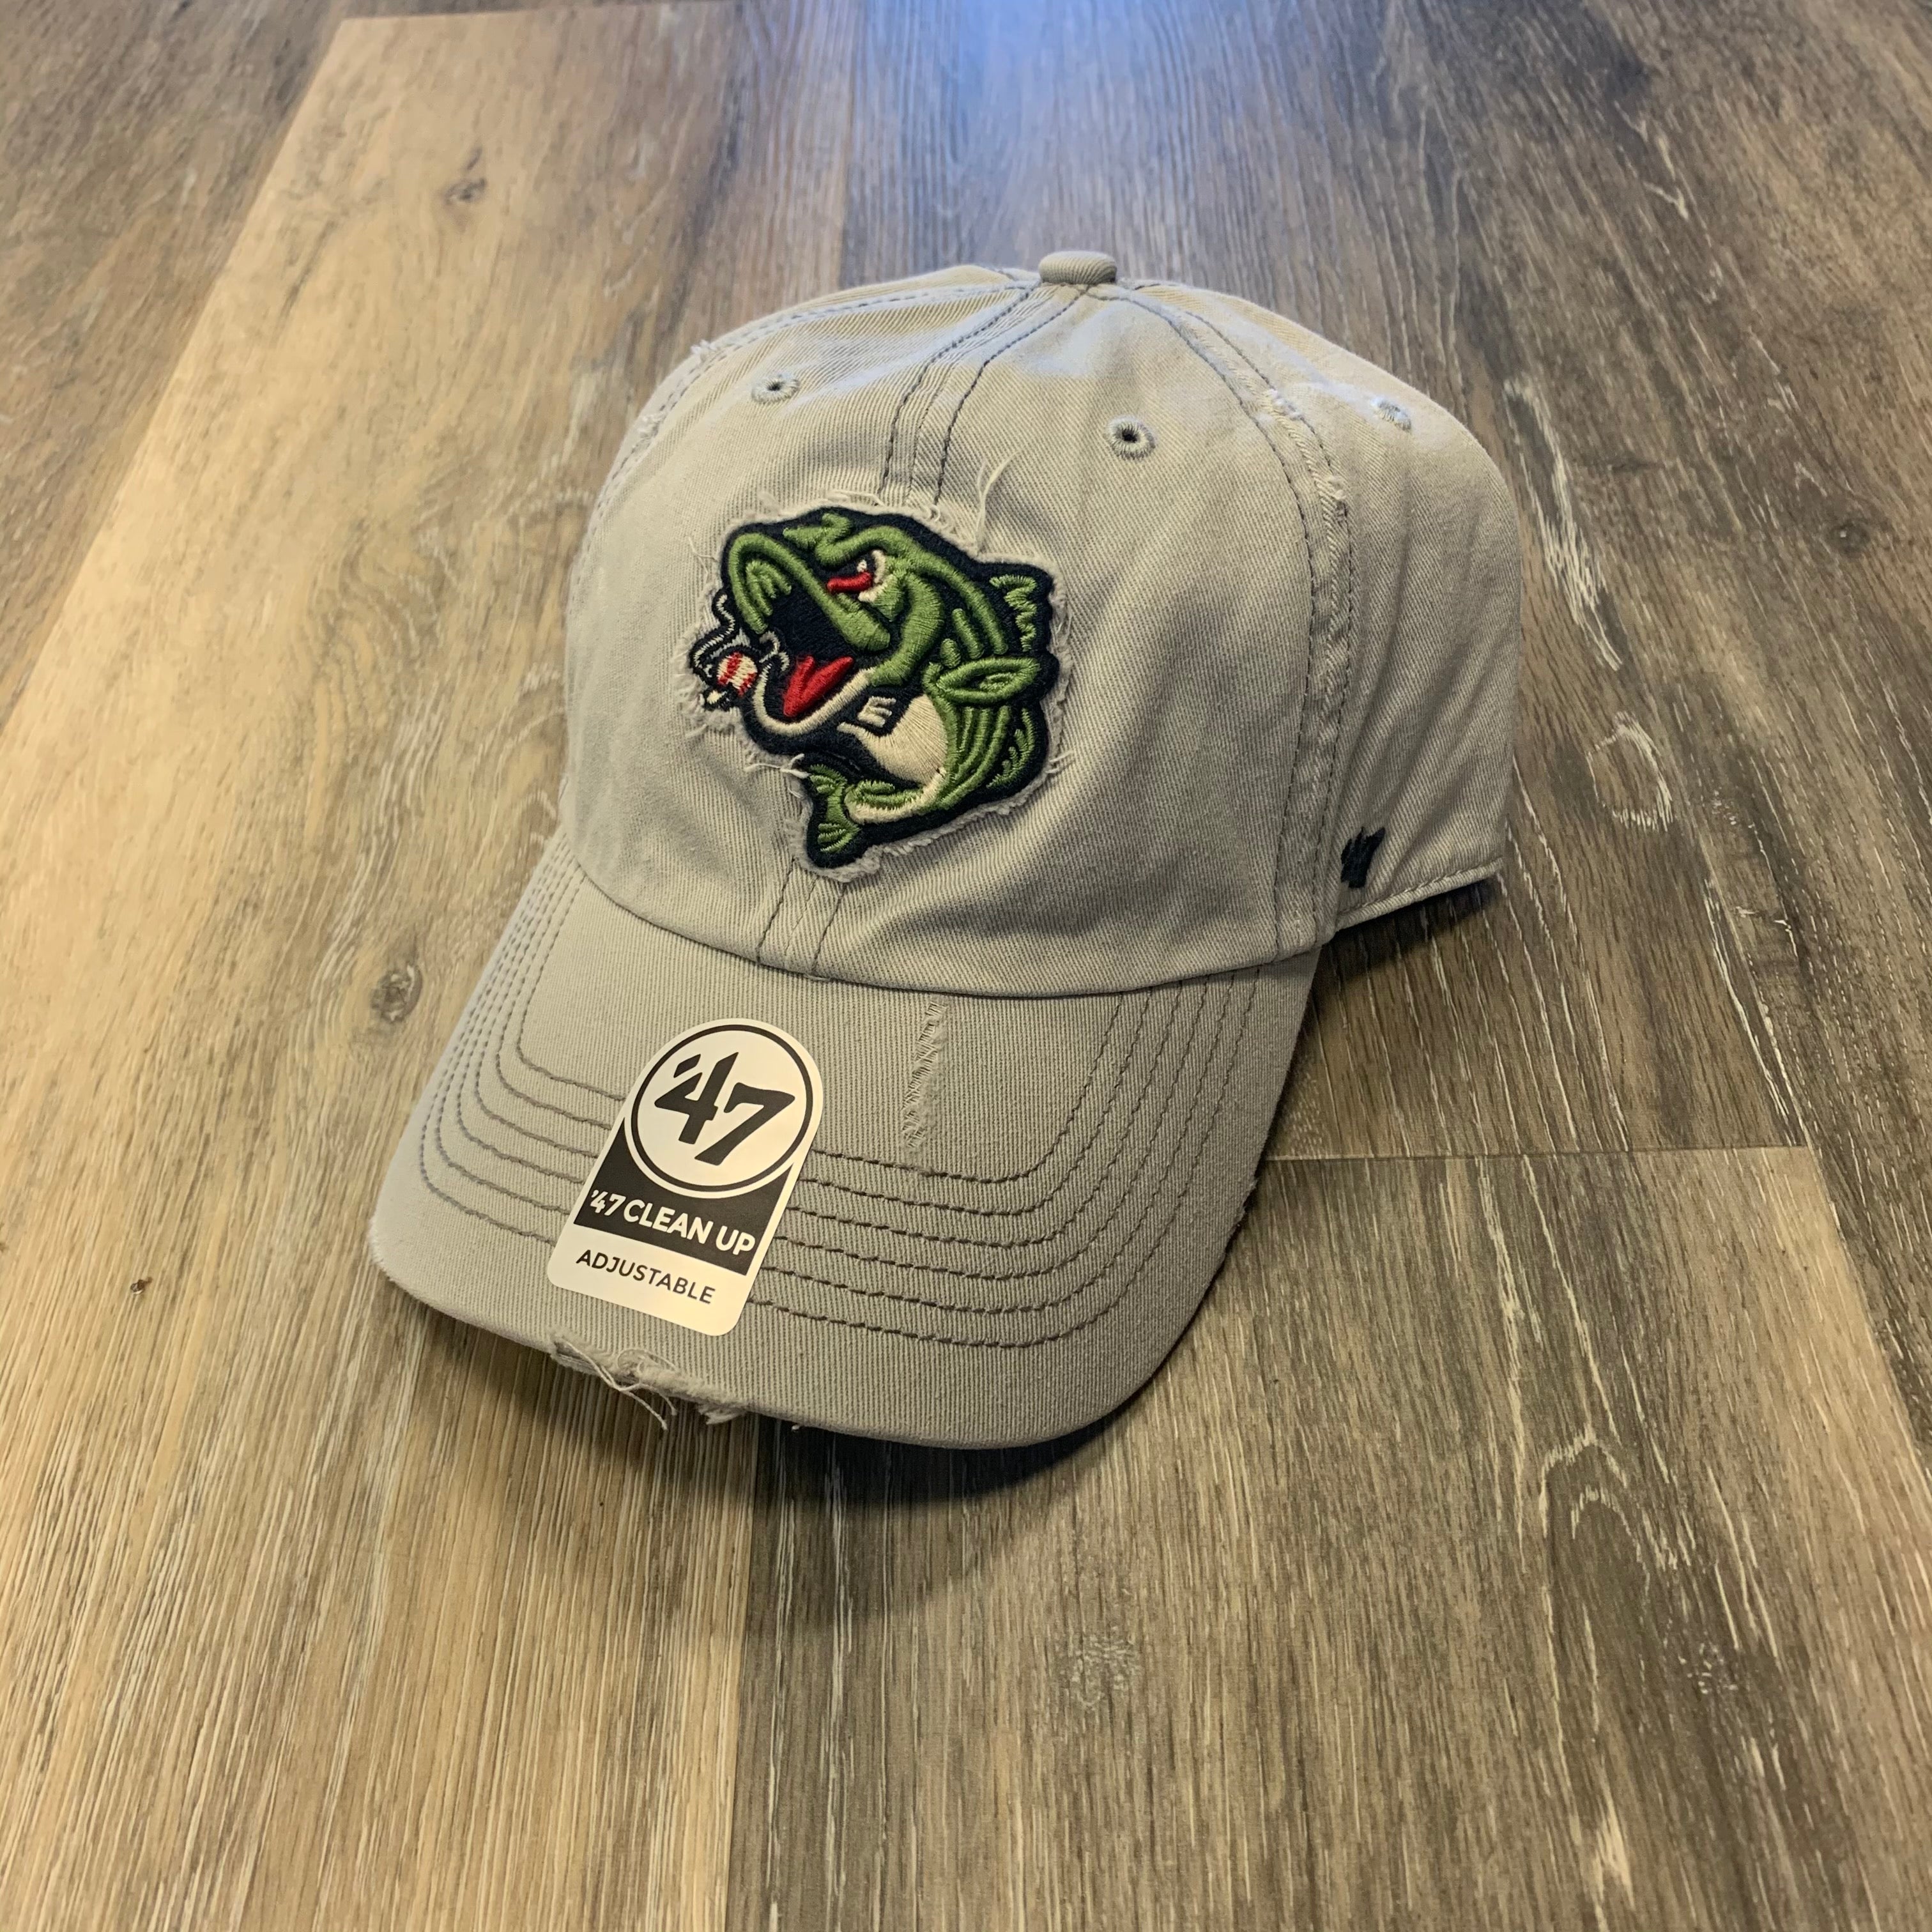 Gwinnett Stripers - Look out for this limited edition fitted hat that hits  the shelves tomorrow at 10 AM. 👀